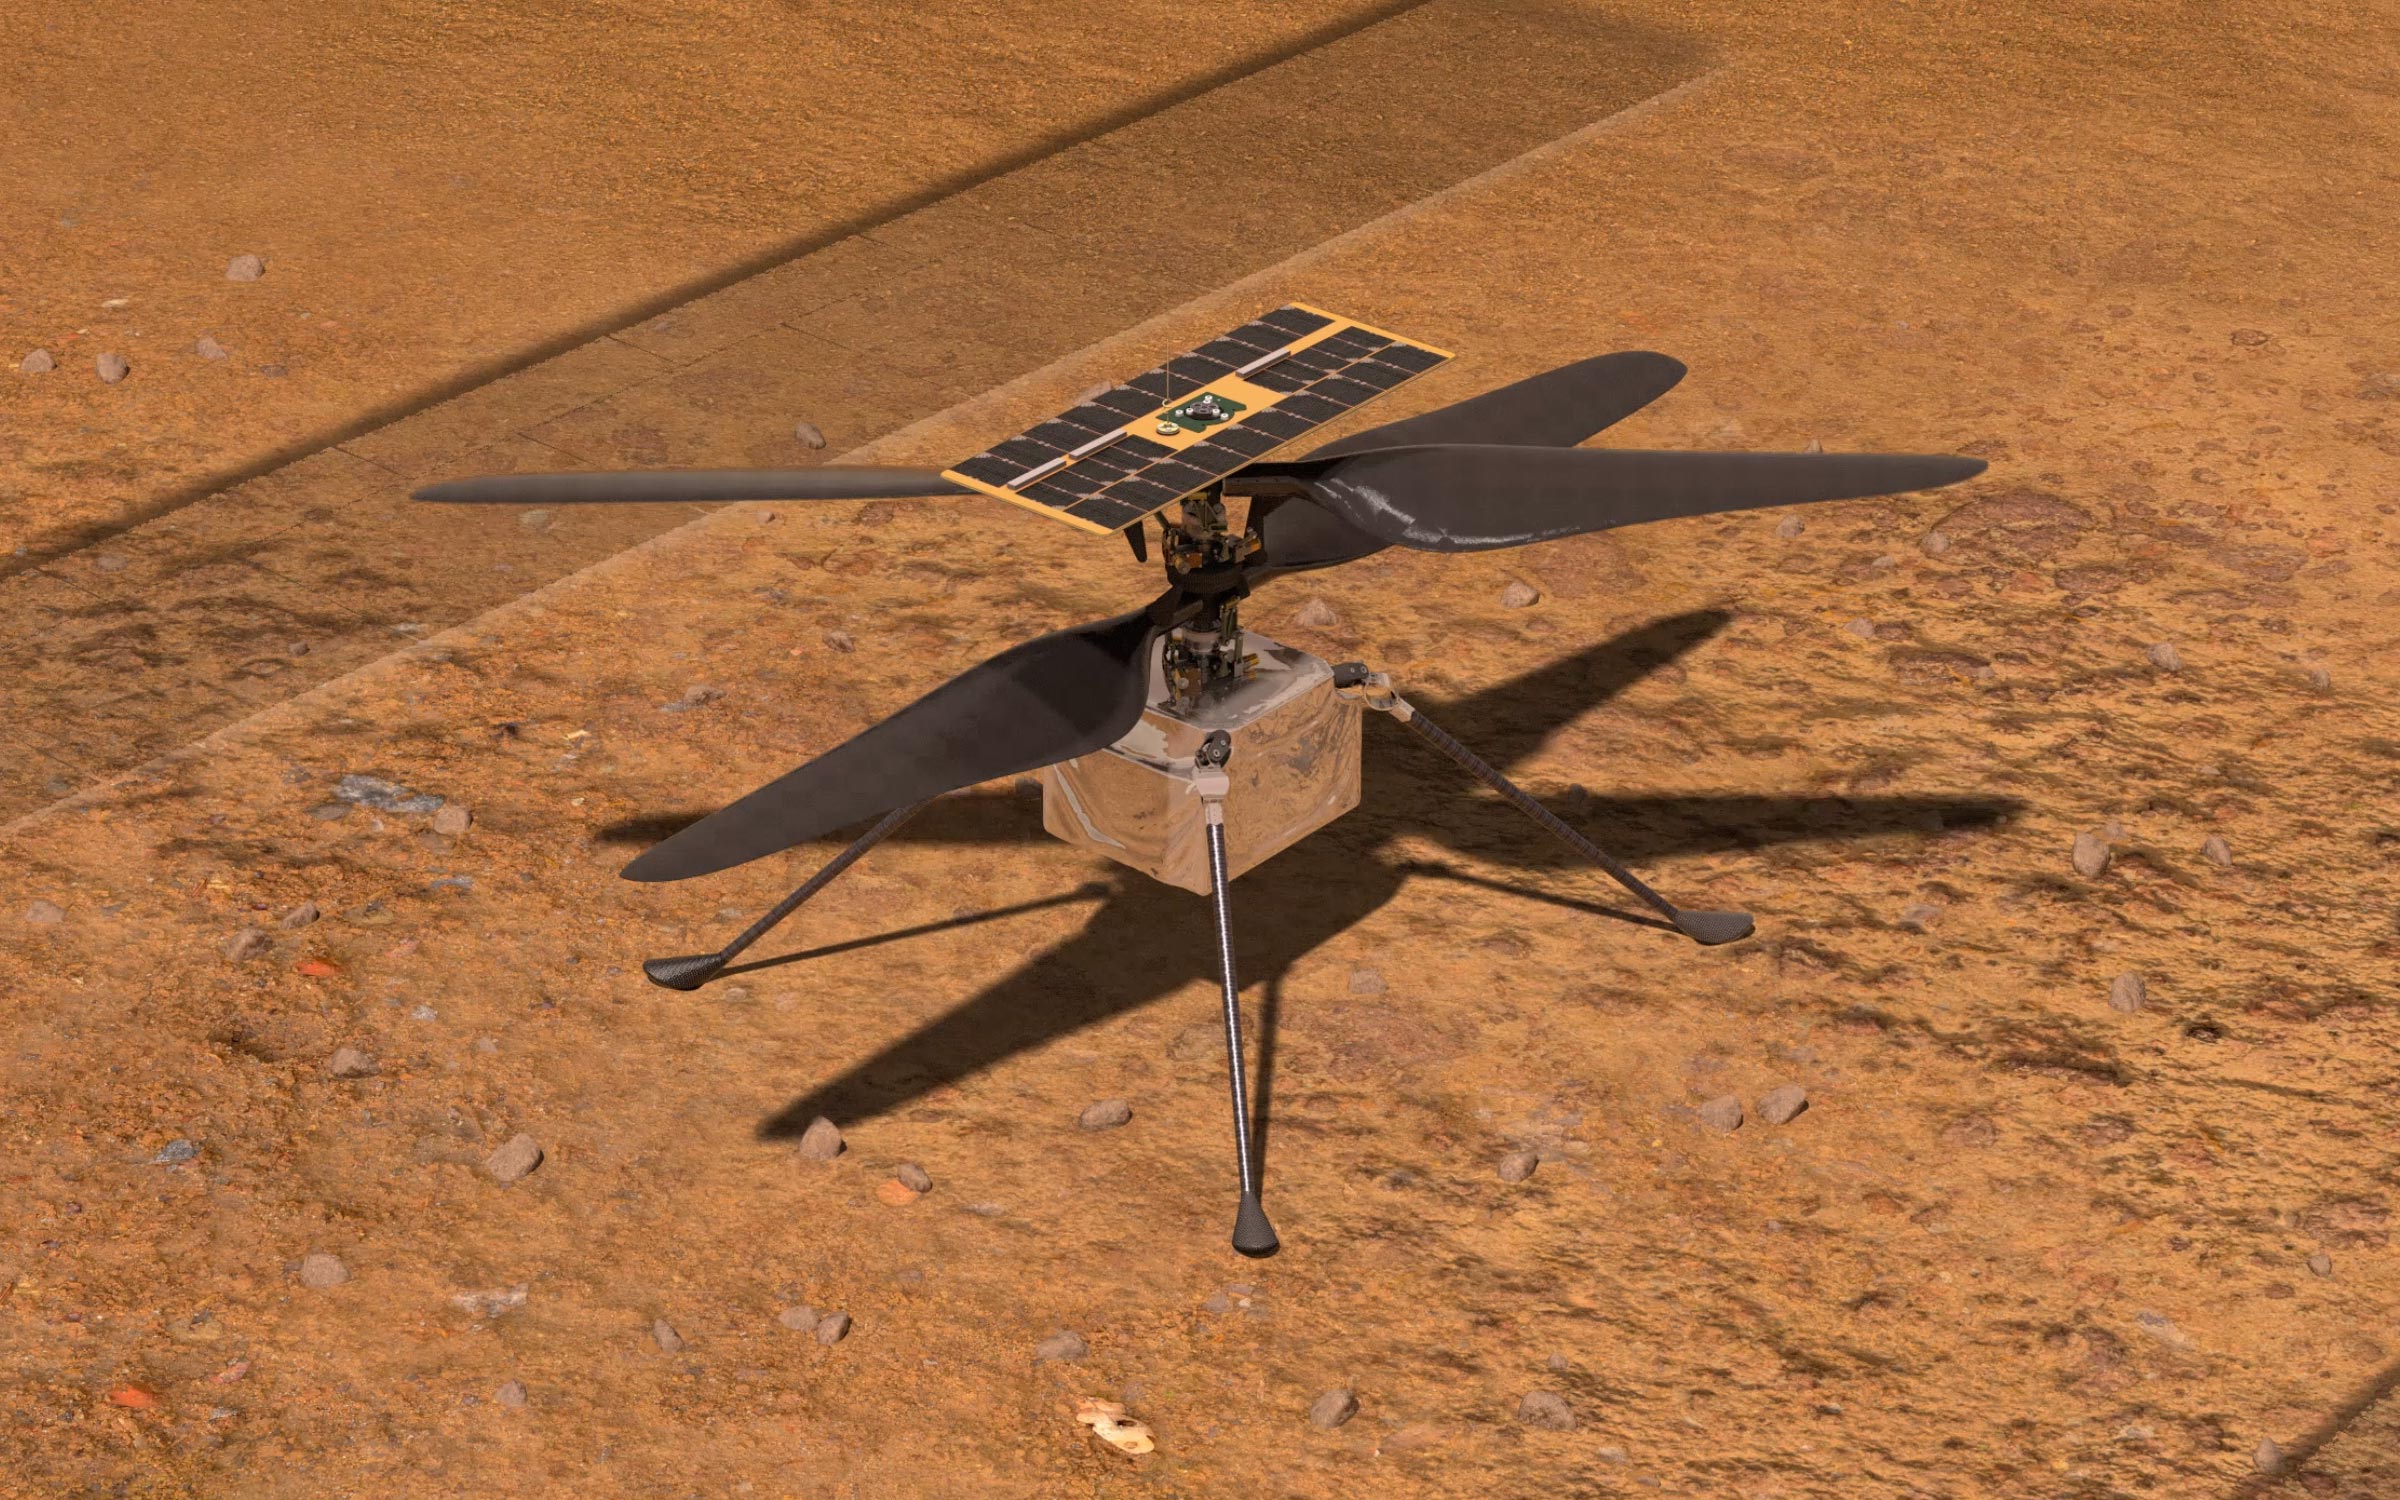 NASA’s ingenious helicopter needs a flight control software update before the first flight to Mars